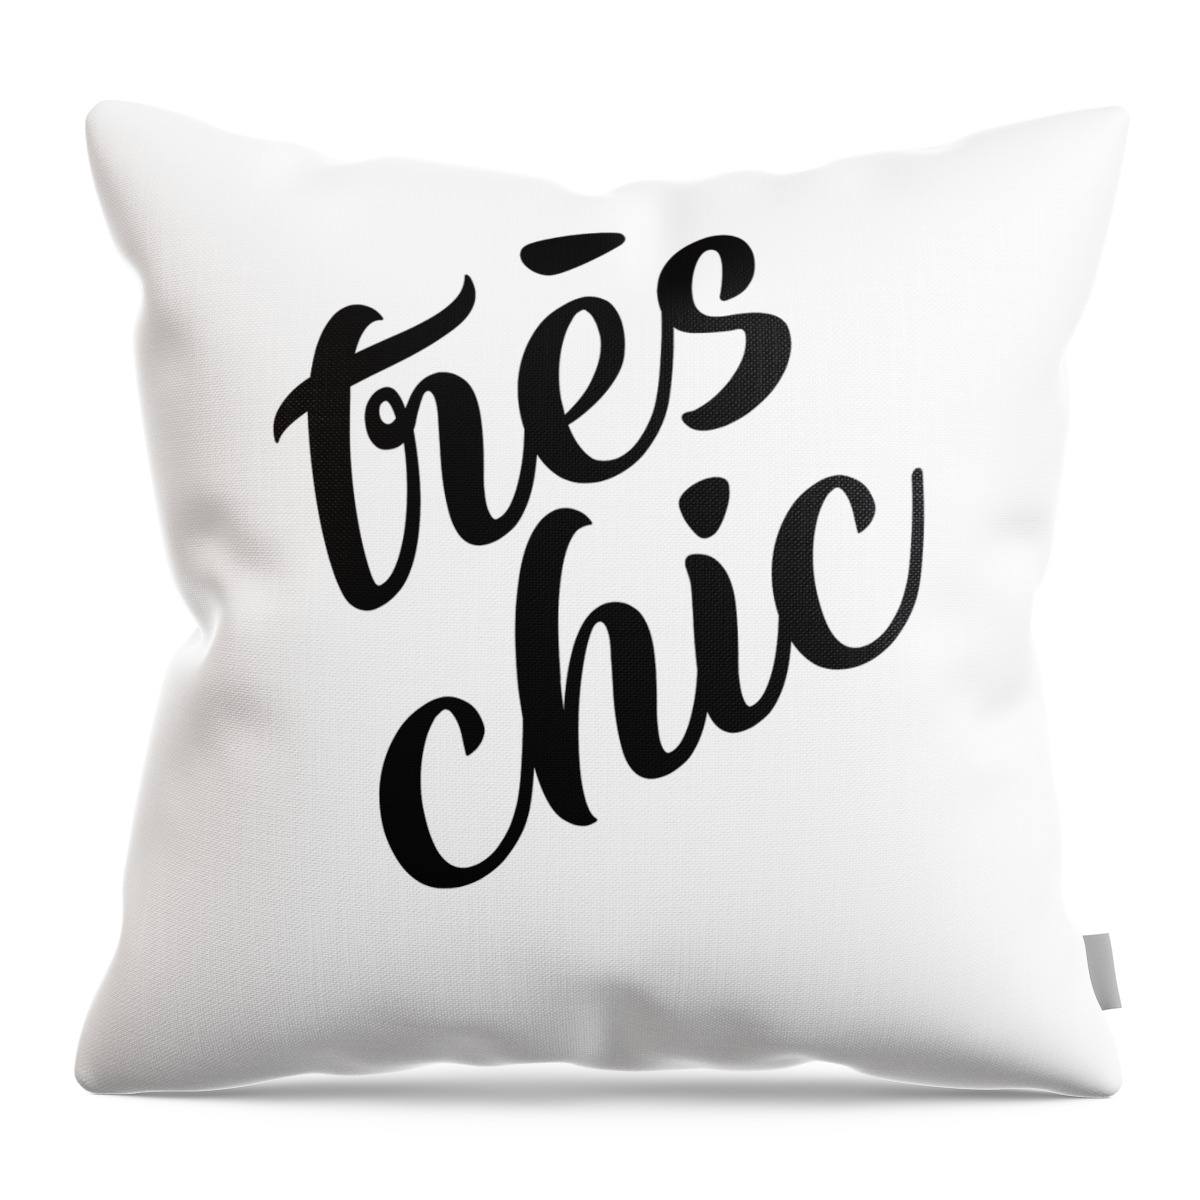 Tres Chic Throw Pillow featuring the mixed media Tres Chic - Fashion - Classy, Bold, Minimal Black and White Typography Print - 5 by Studio Grafiikka